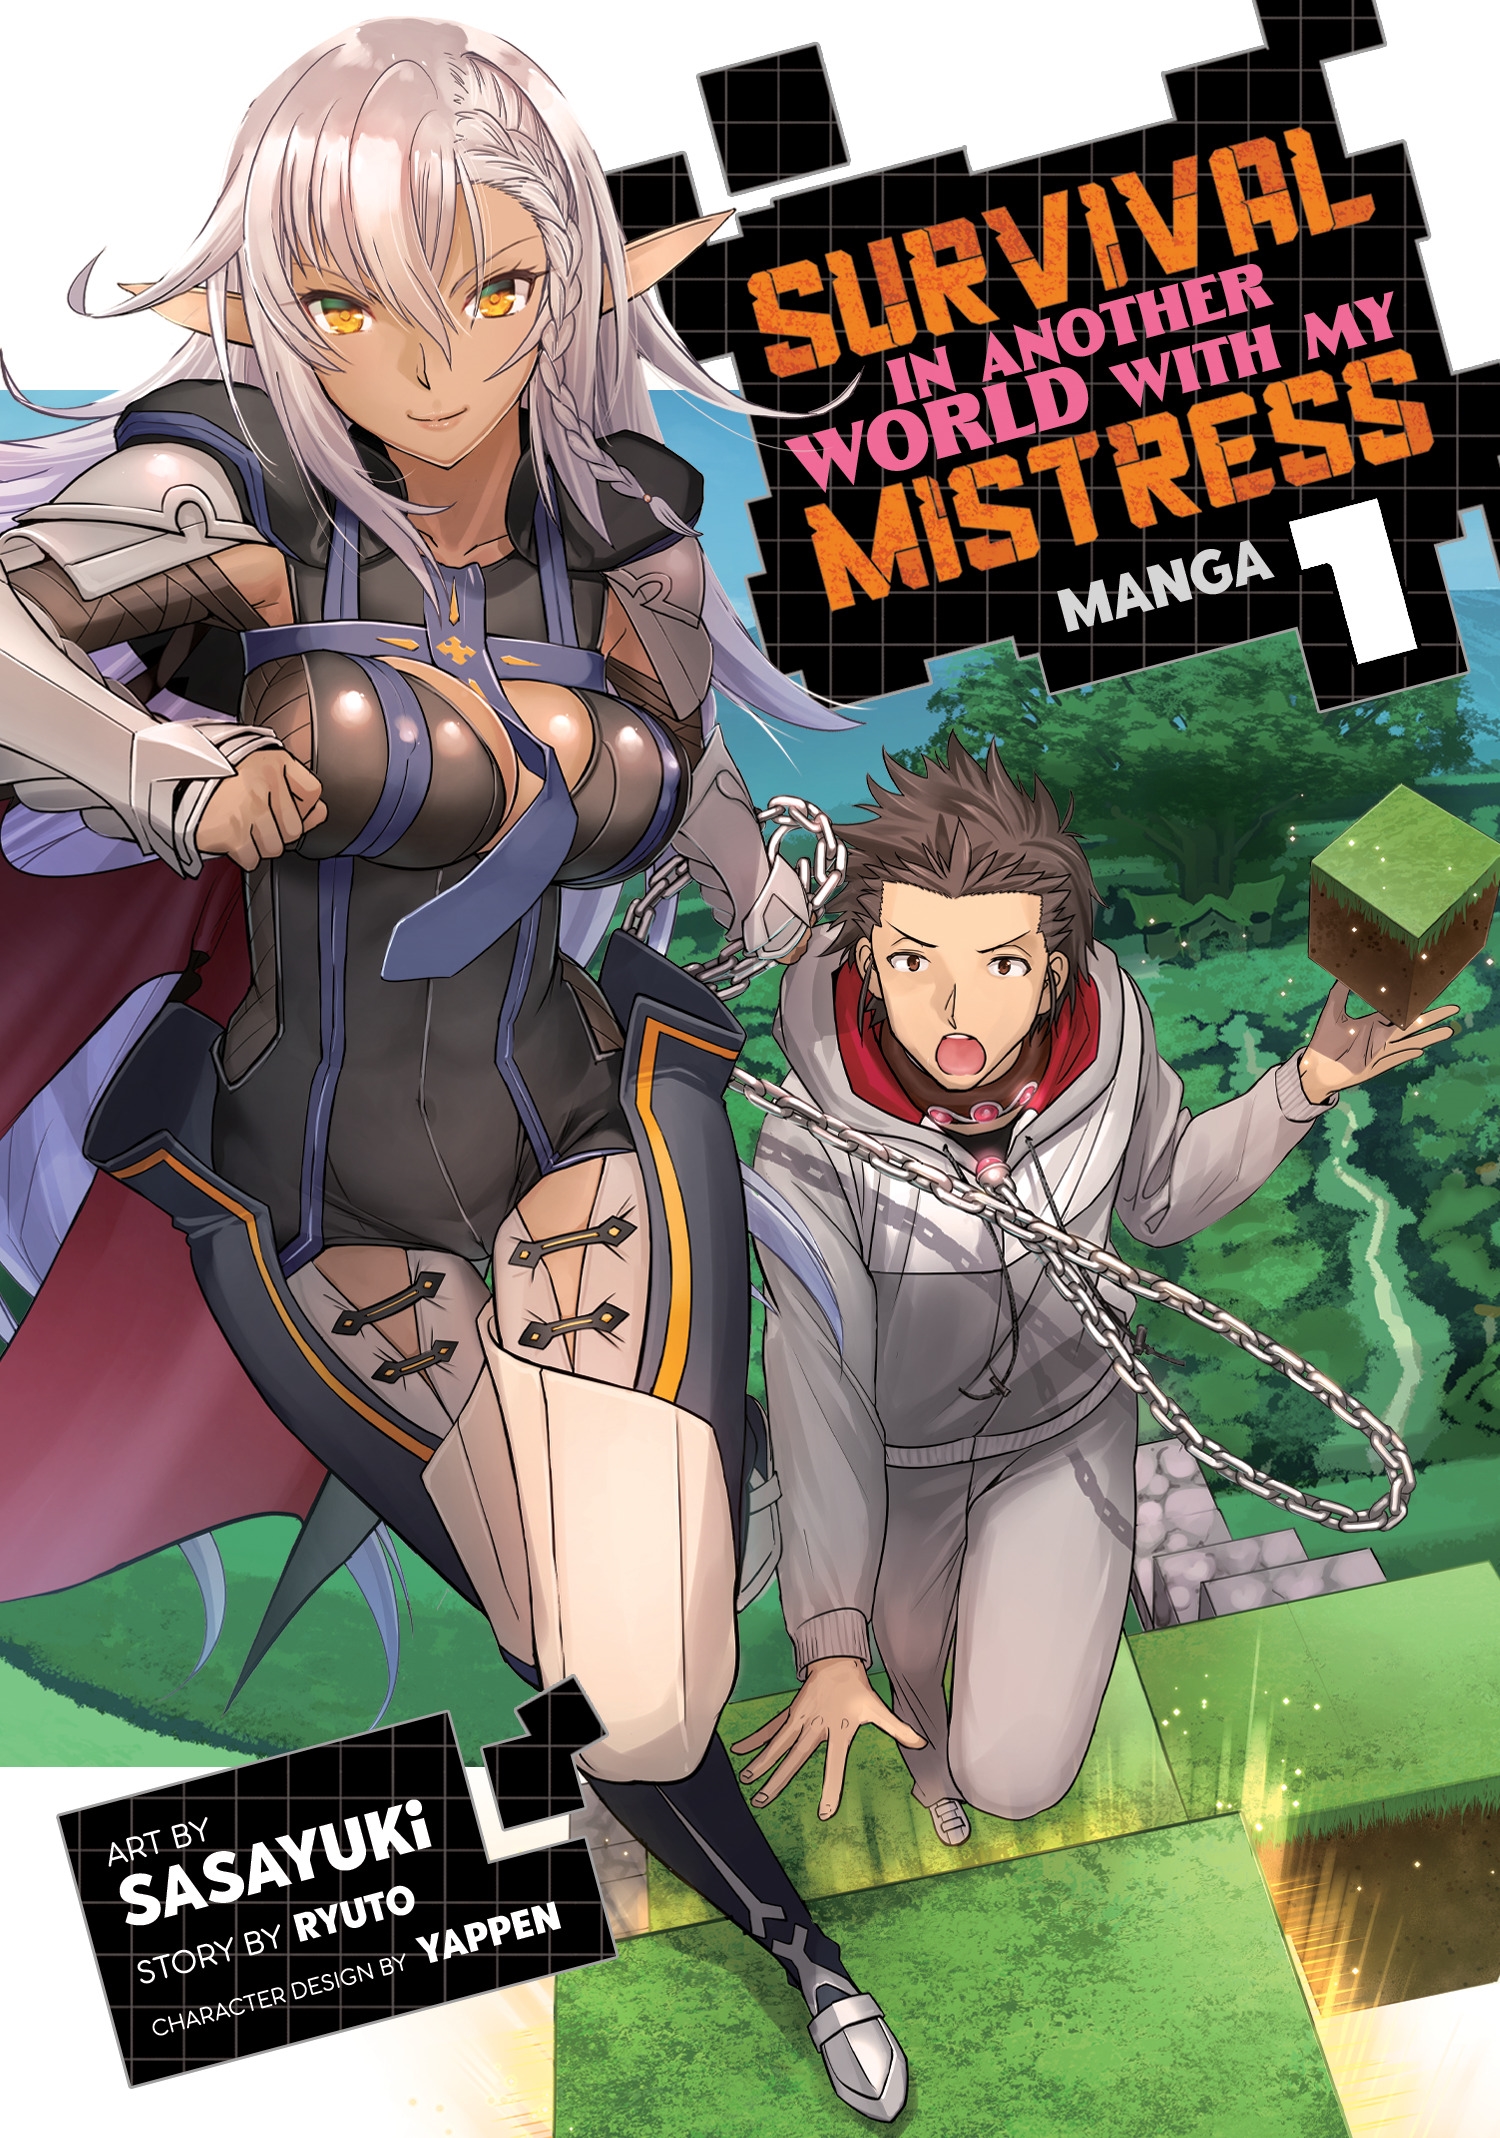 Survival in Another World with My Mistress! (Manga) Vol. 1 by Ryuto -  Penguin Books New Zealand